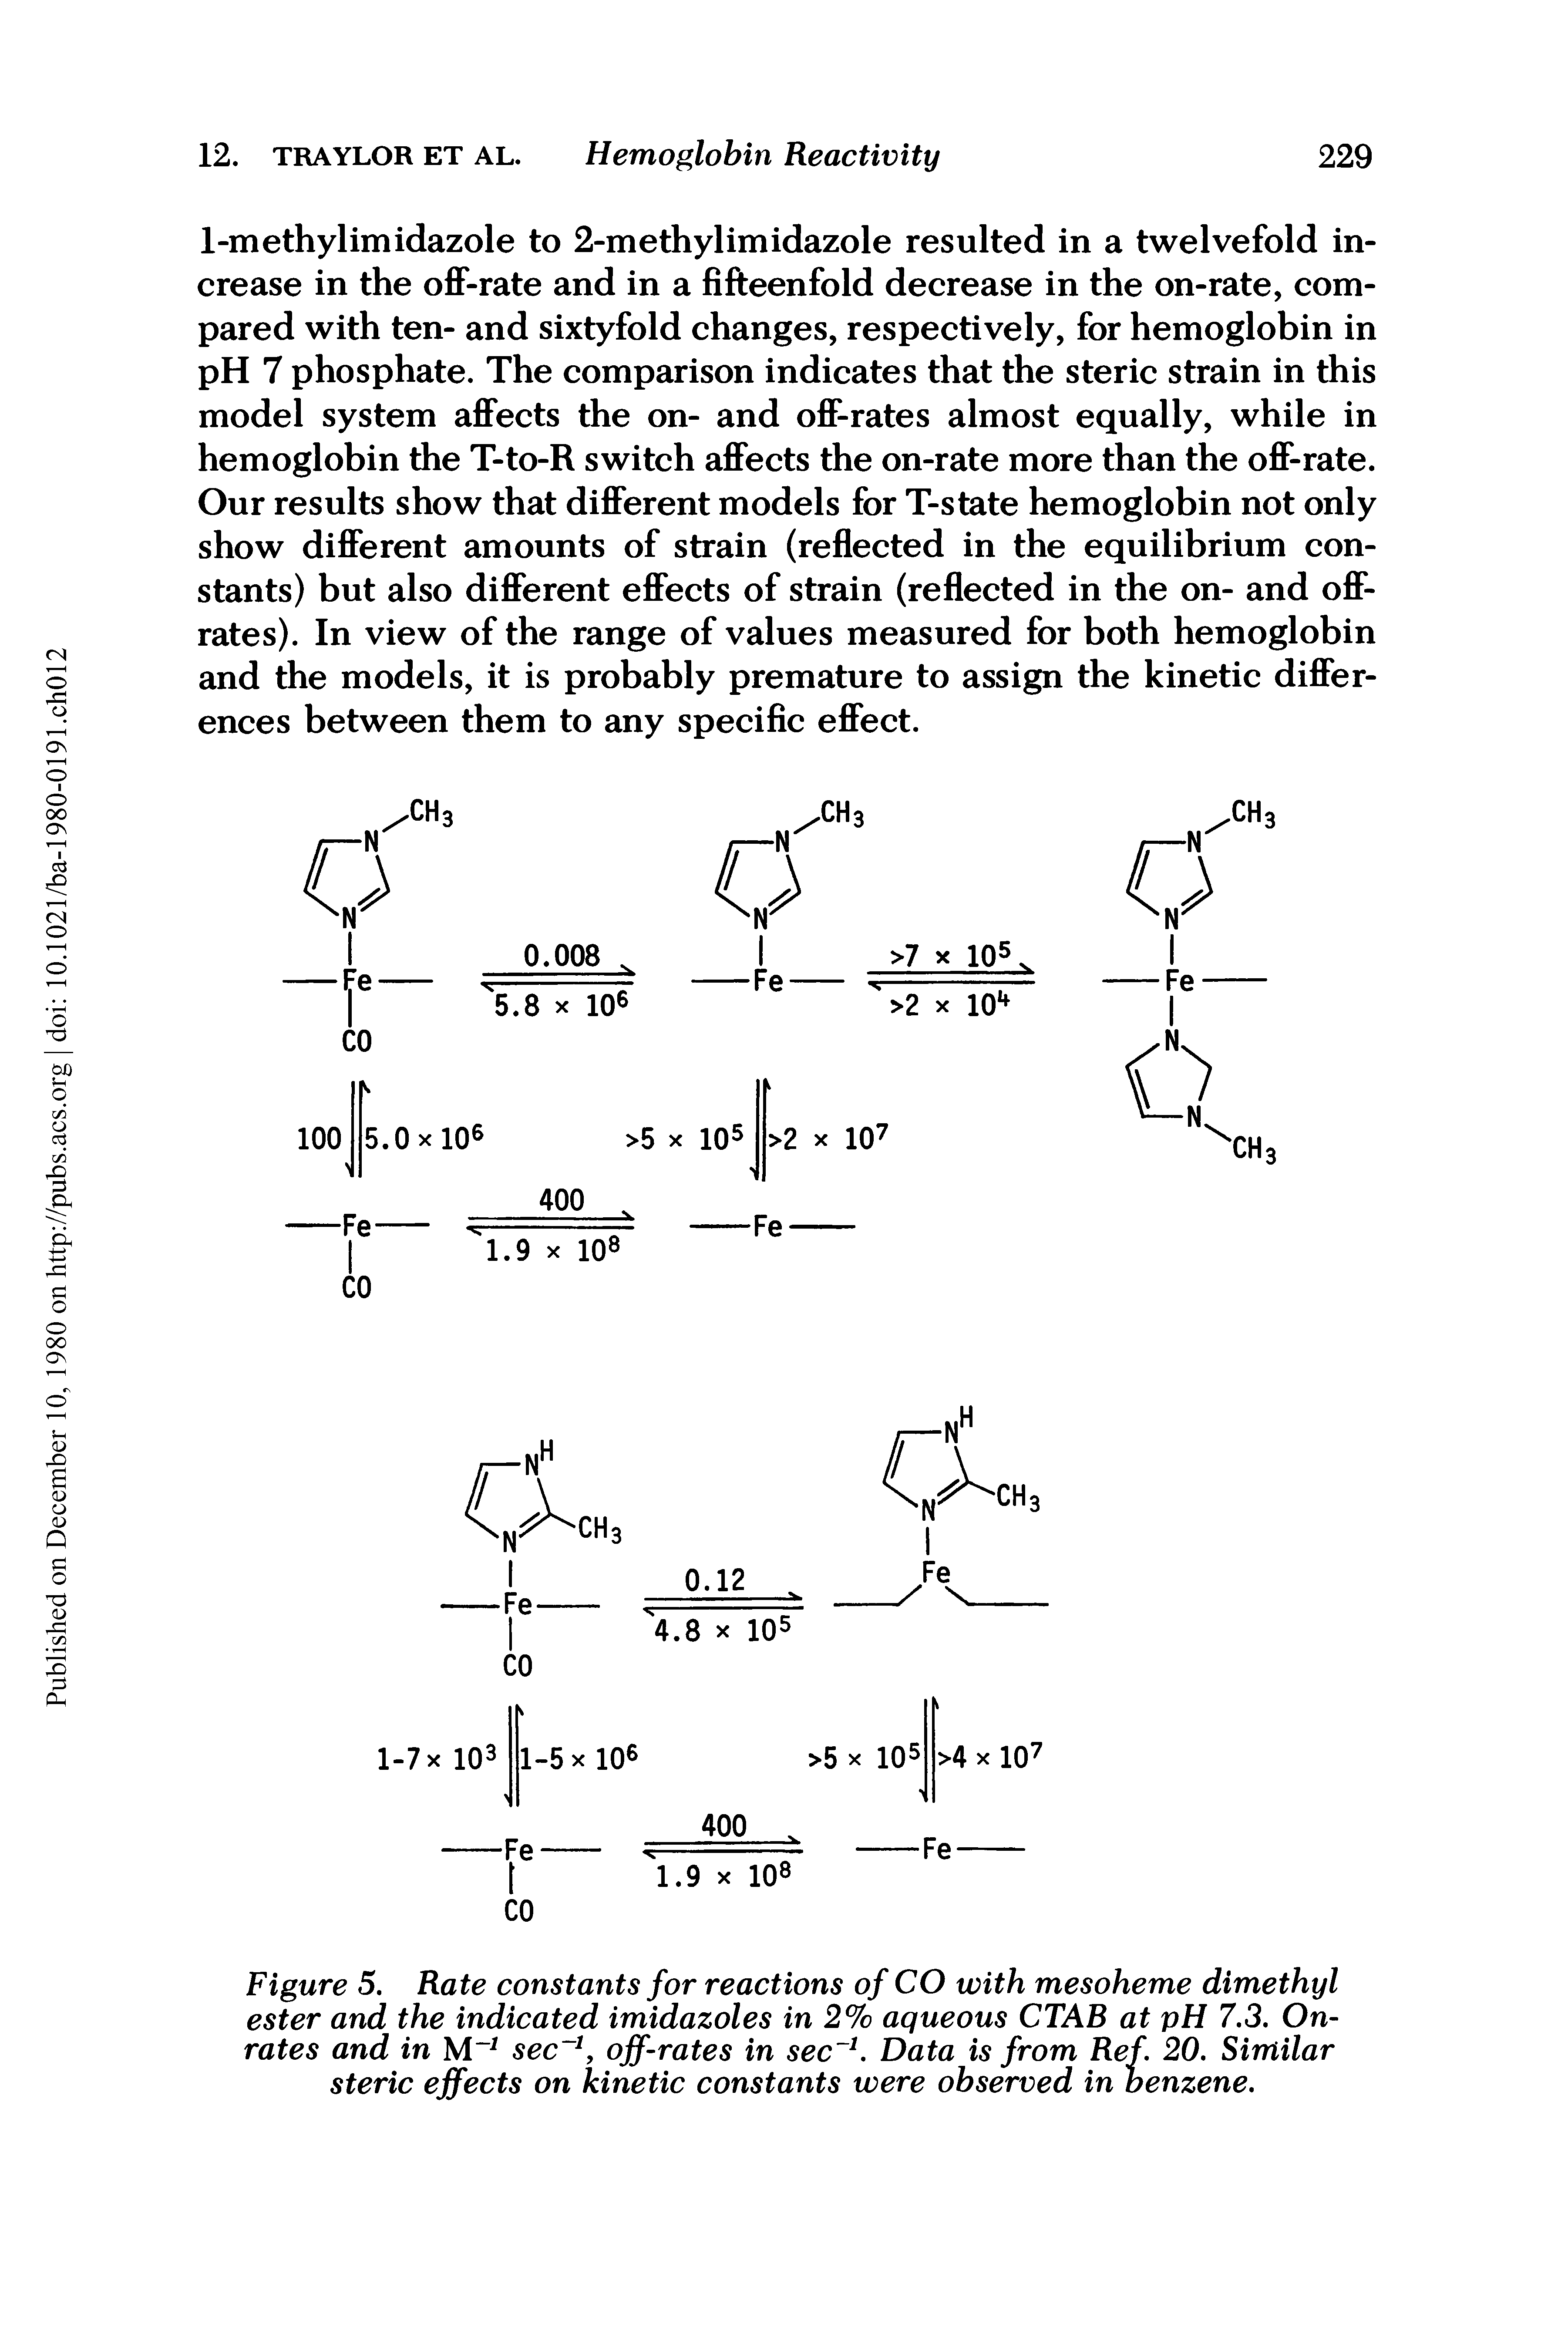 Figure 5. Rate constants for reactions of CO with mesoheme dimethyl ester and the indicated imidazoles in 2% aqueous CTAB at pH 7.3. On-rates and in M-1 sec f off-rates in sec 1. Data is from Ref. 20. Similar steric effects on kinetic constants were observed in benzene.